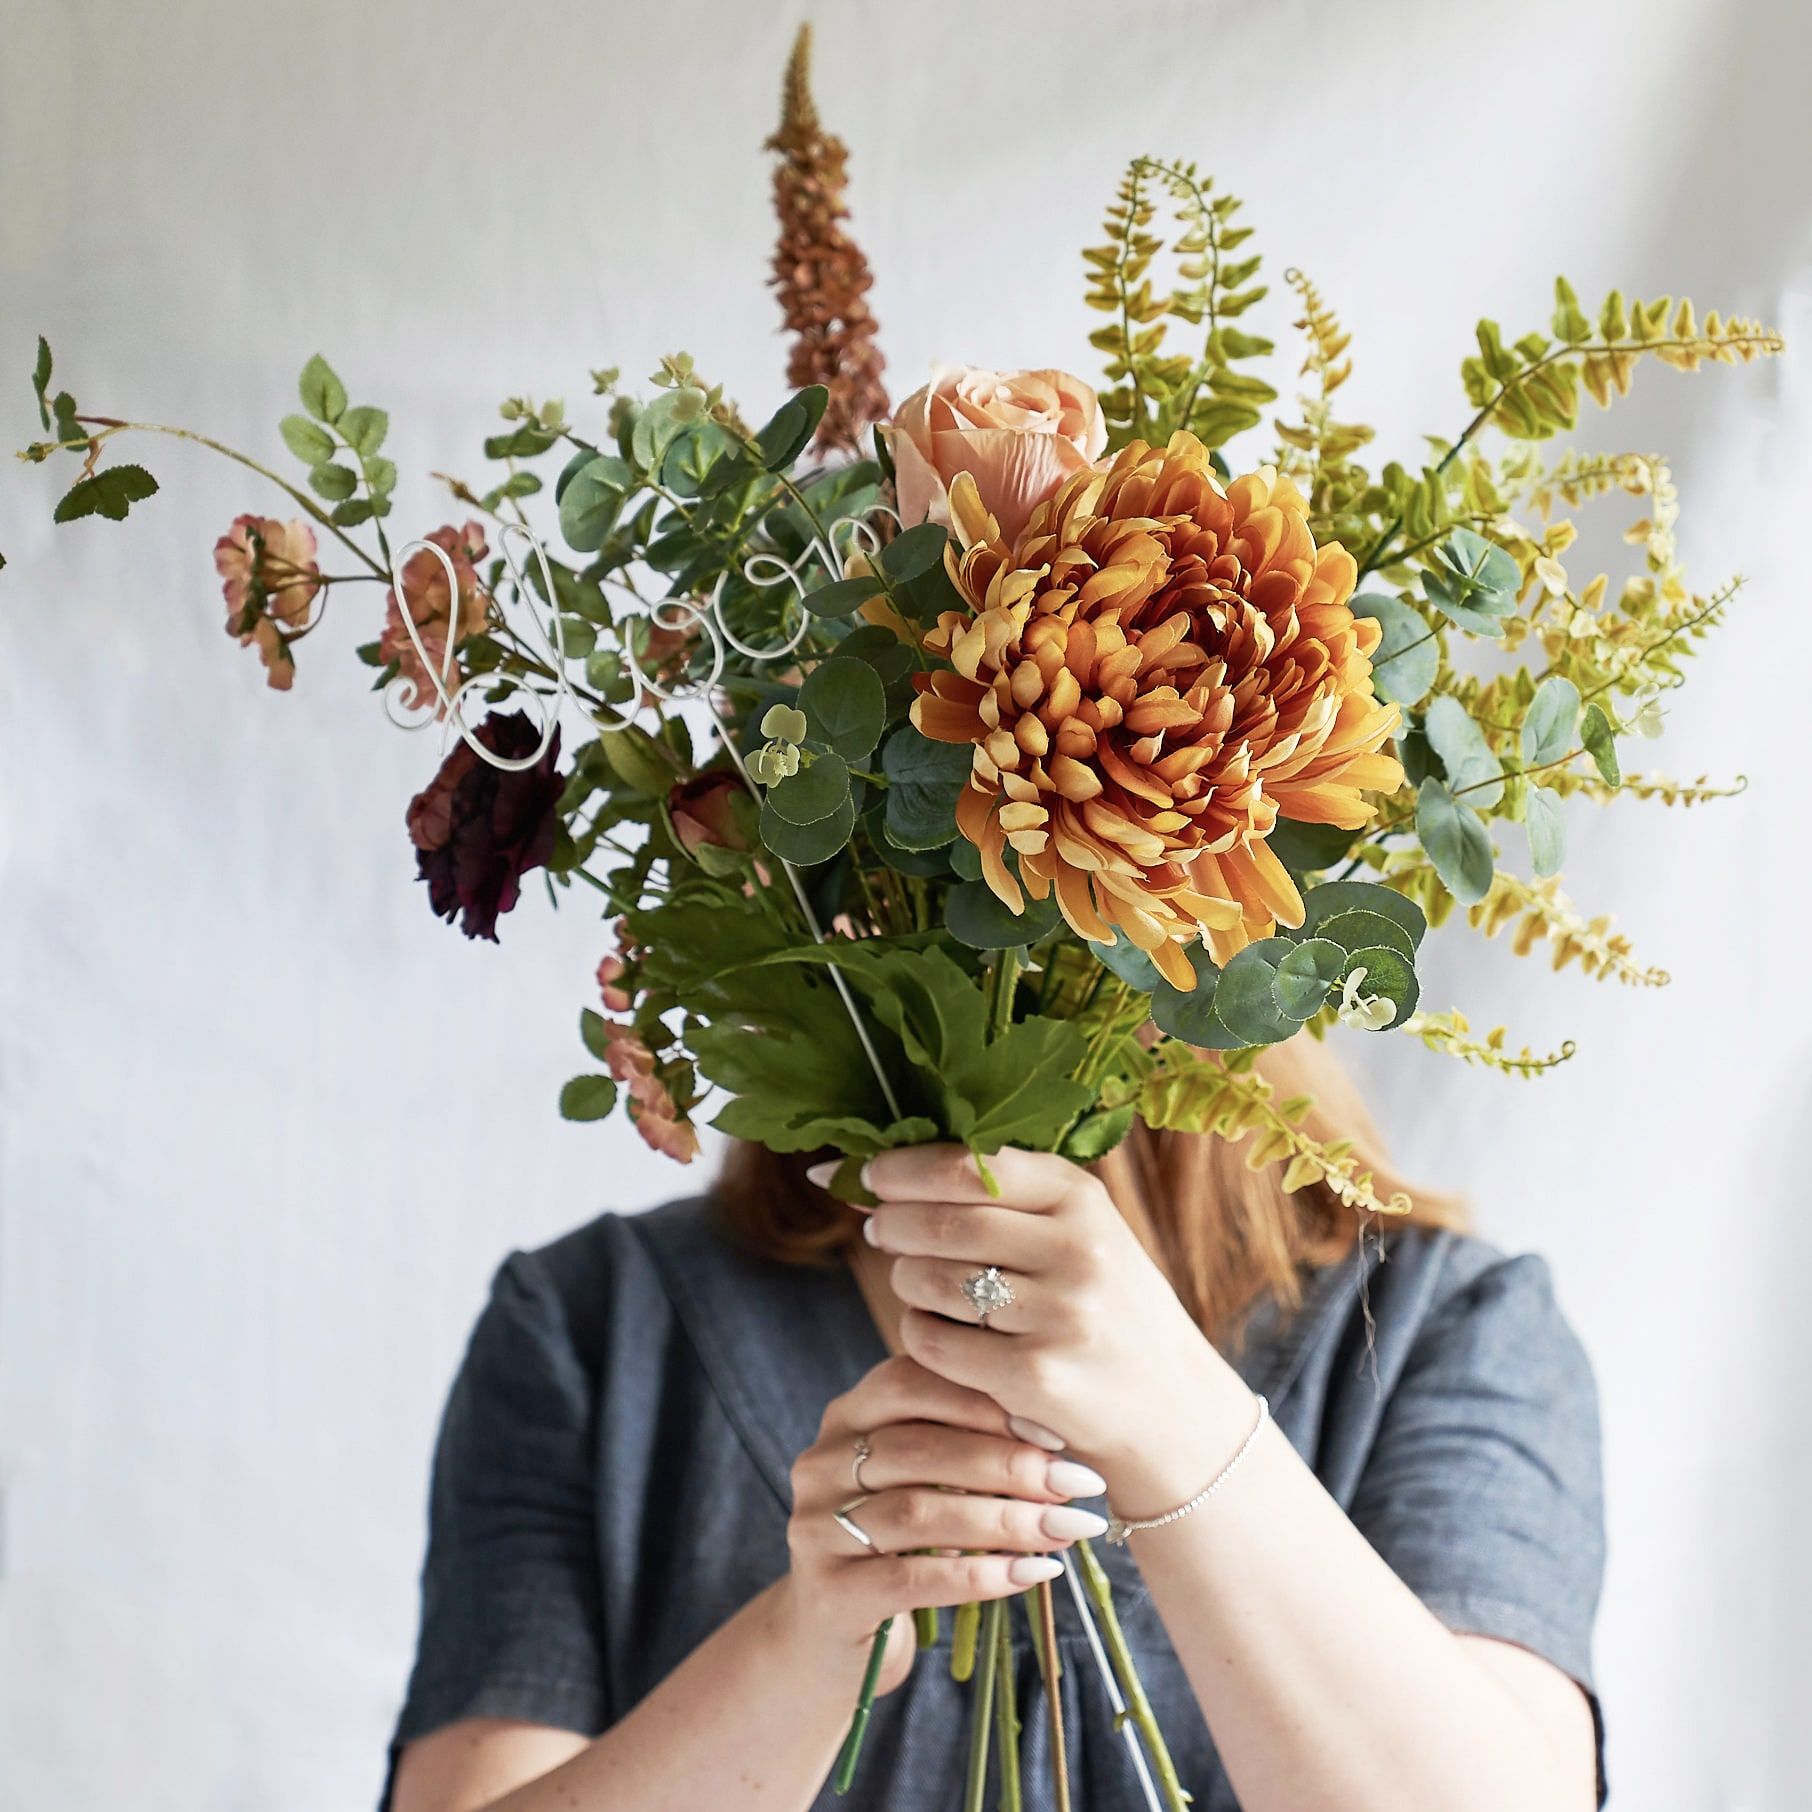 Exploring Industrial Botanicals With The Letter Loft